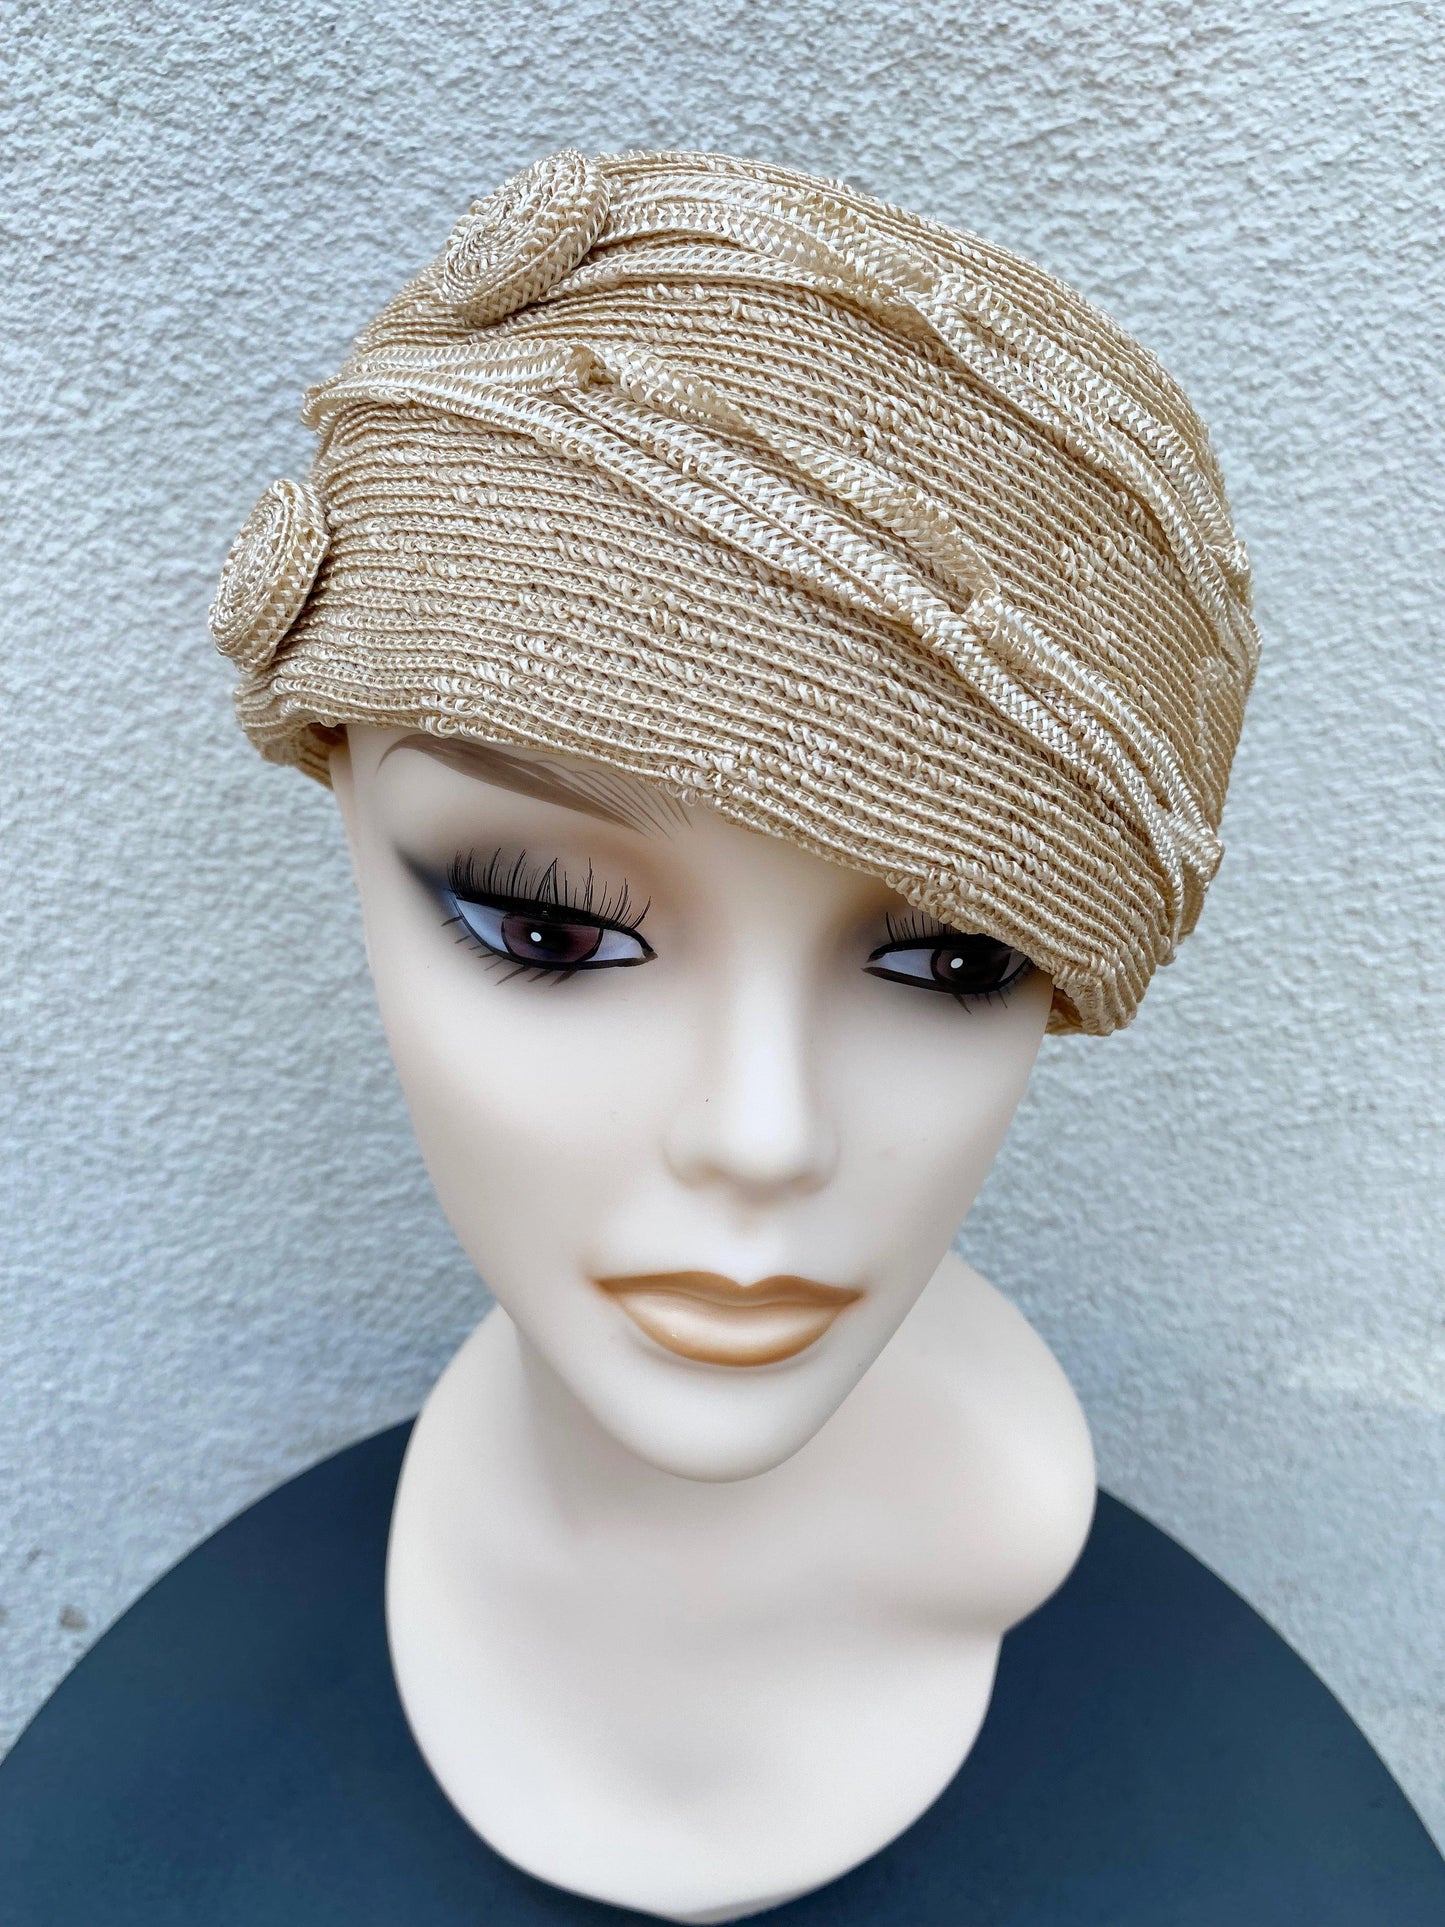 1920's Beige Straw Cloche Hat with Woven Circles - A Walk Thru Time Vintage